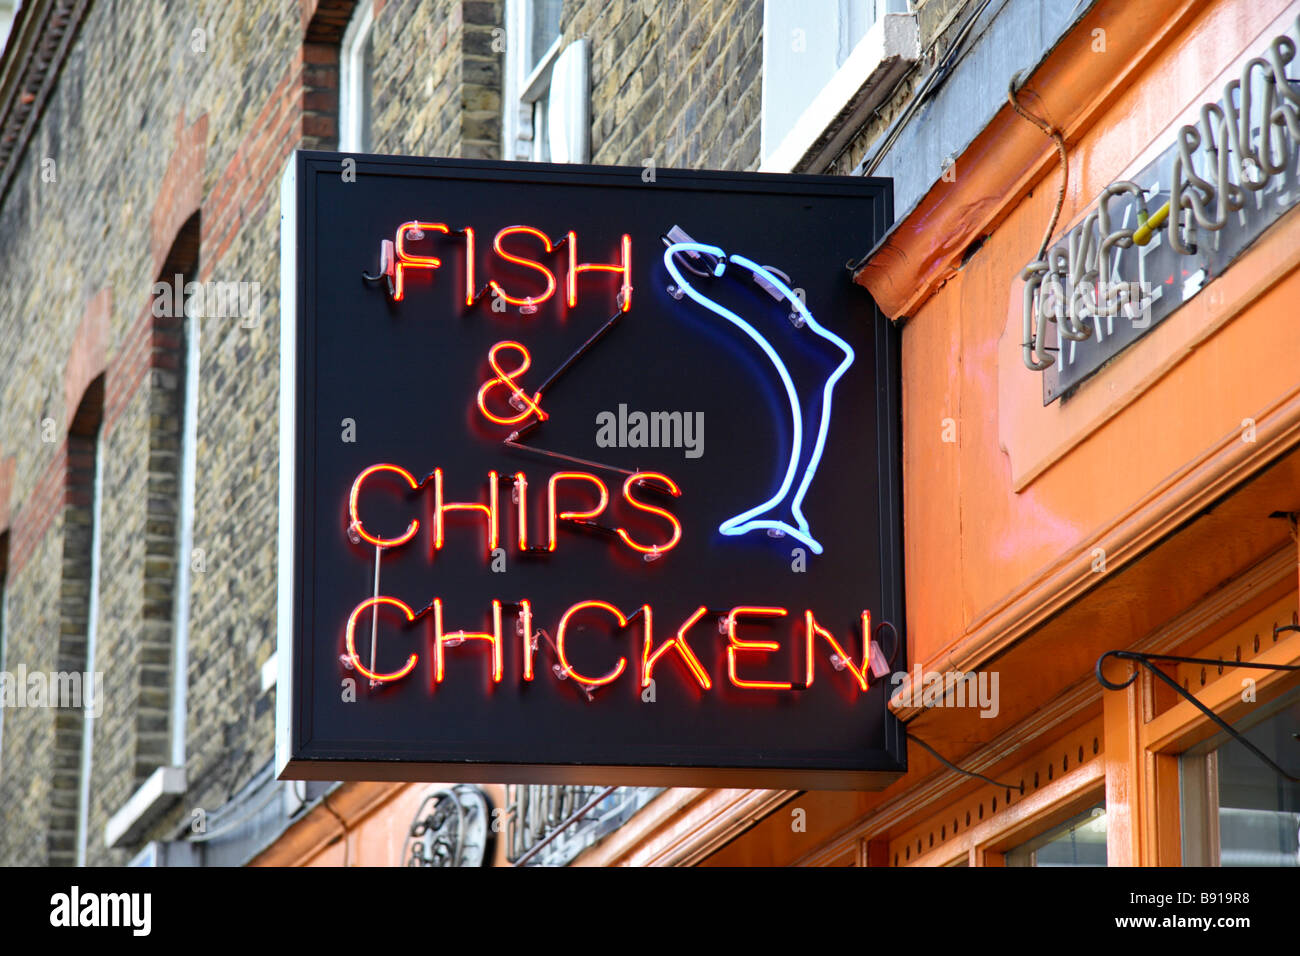 A fish & chips neon sign above a shop in Victoria, London. Mar 2009 Stock Photo